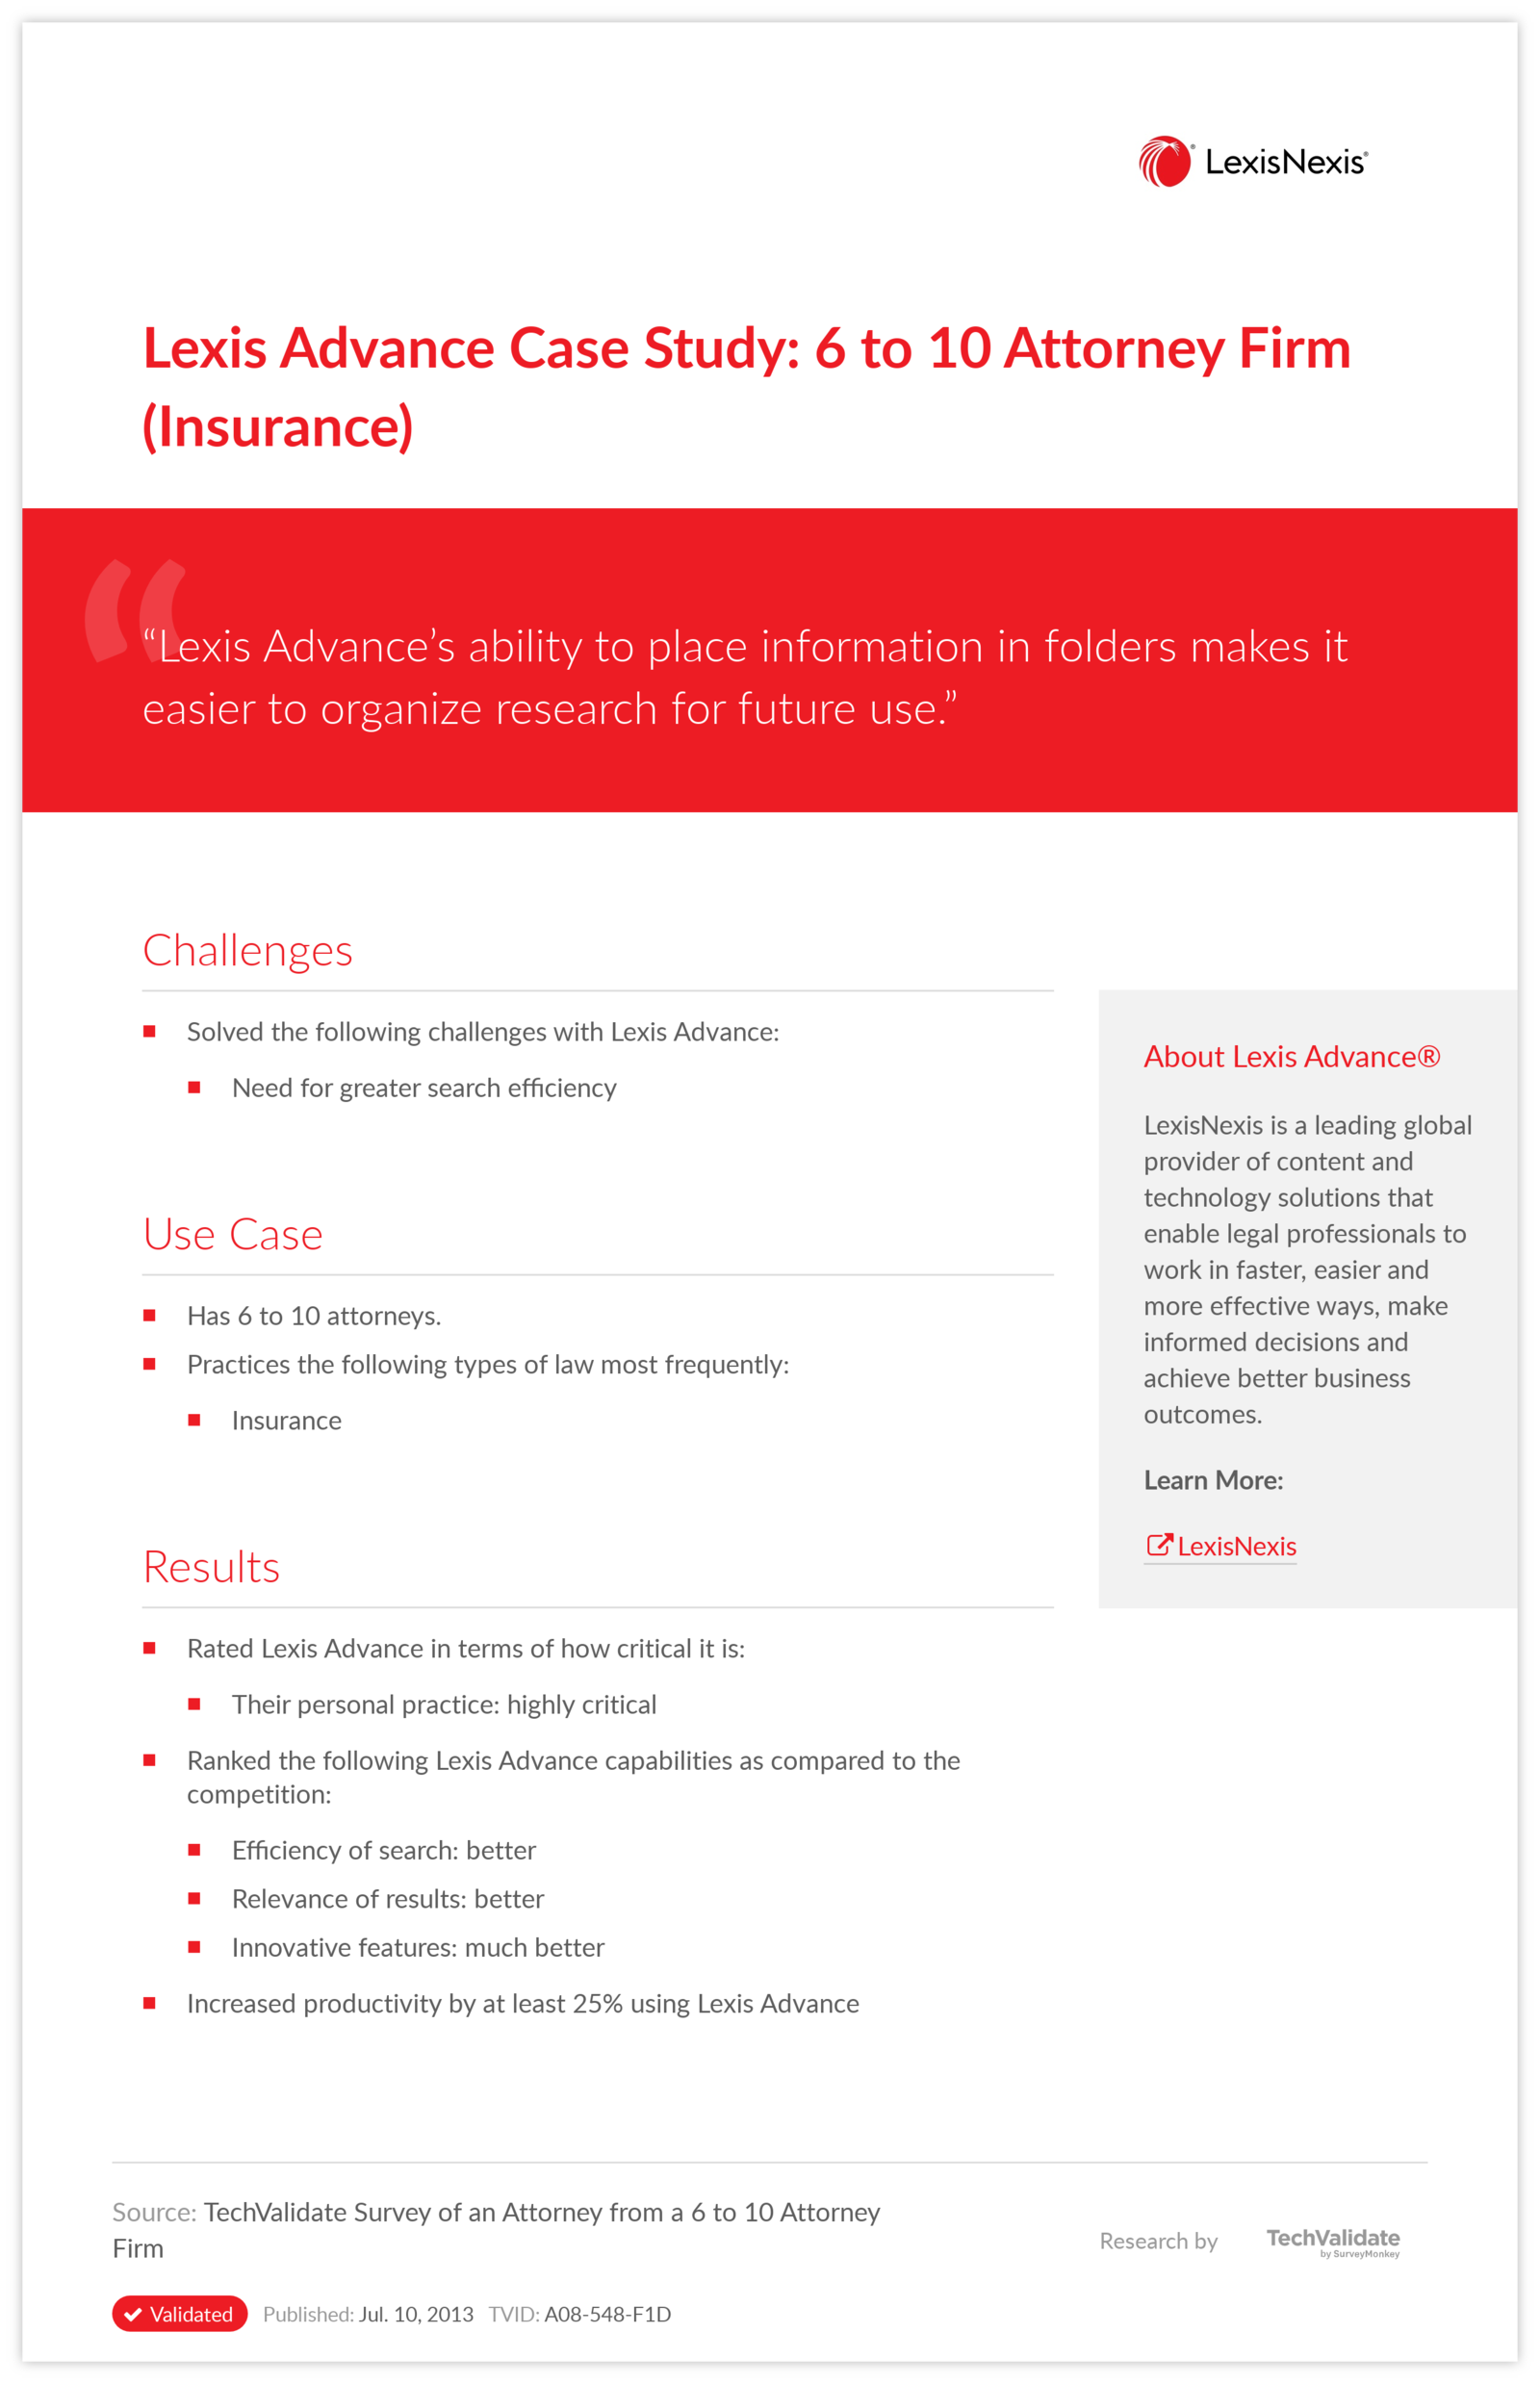 Lexis Advance Case Study: 6 to 10 Attorney Firm (Insurance)